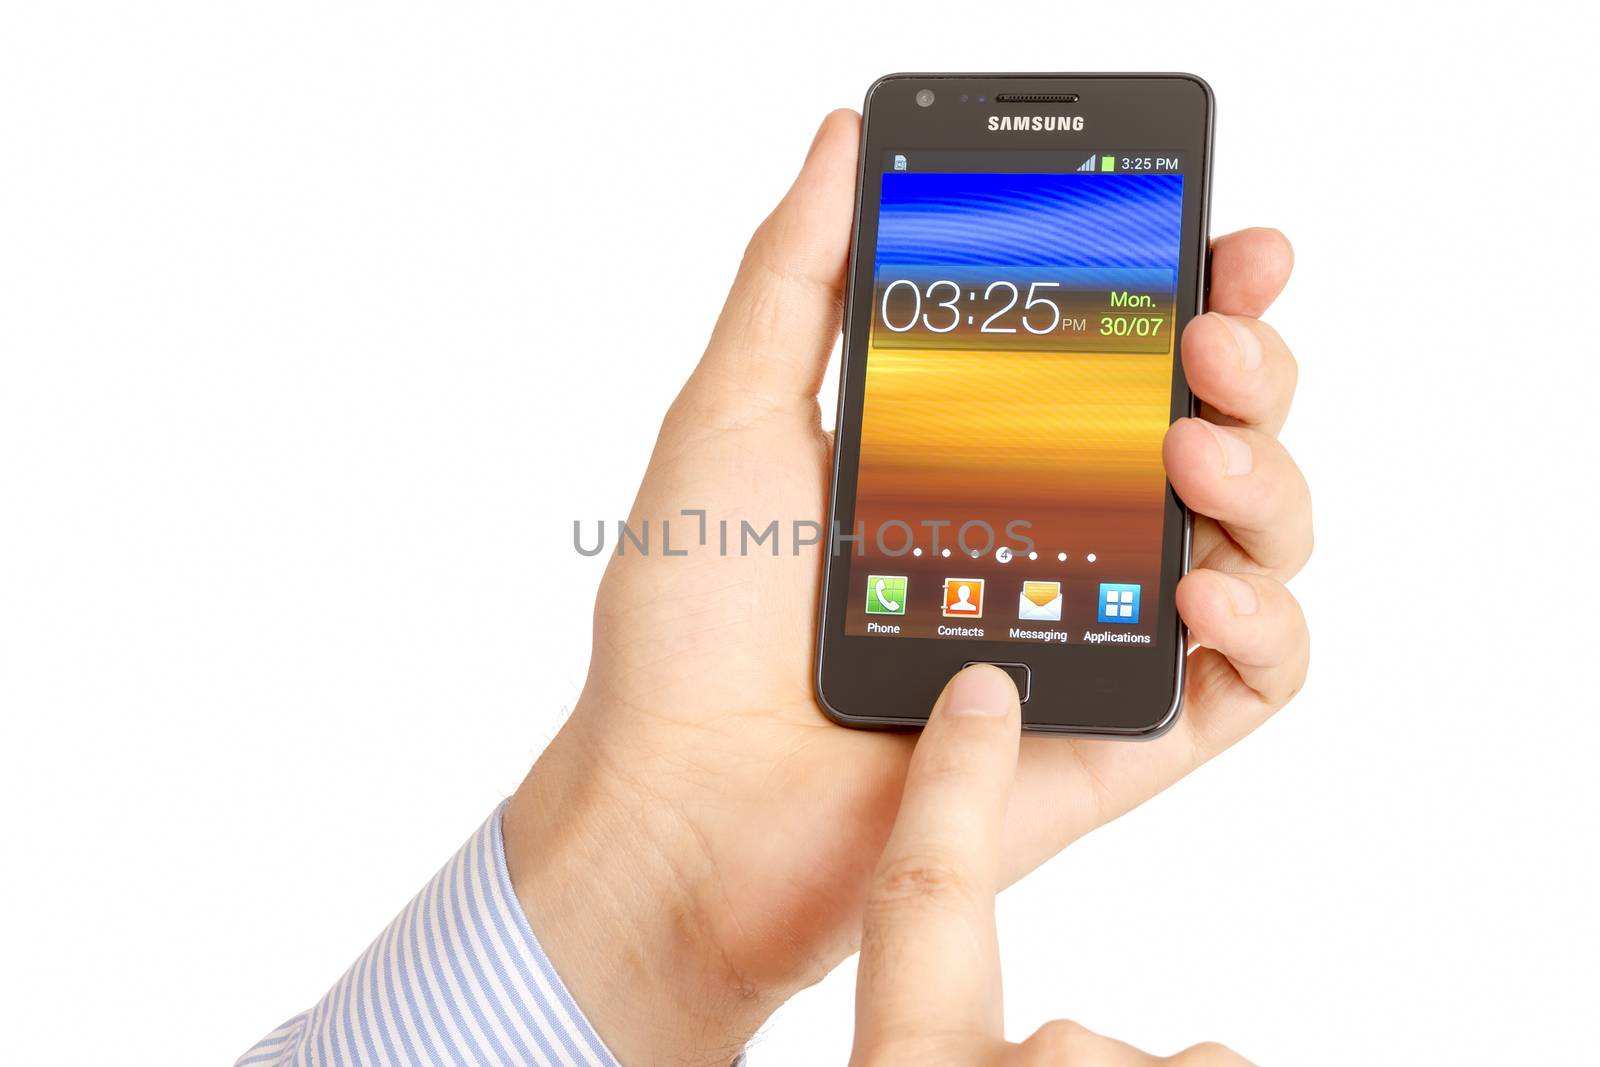 Hand holding the Samsung Galaxy S2 by manaemedia